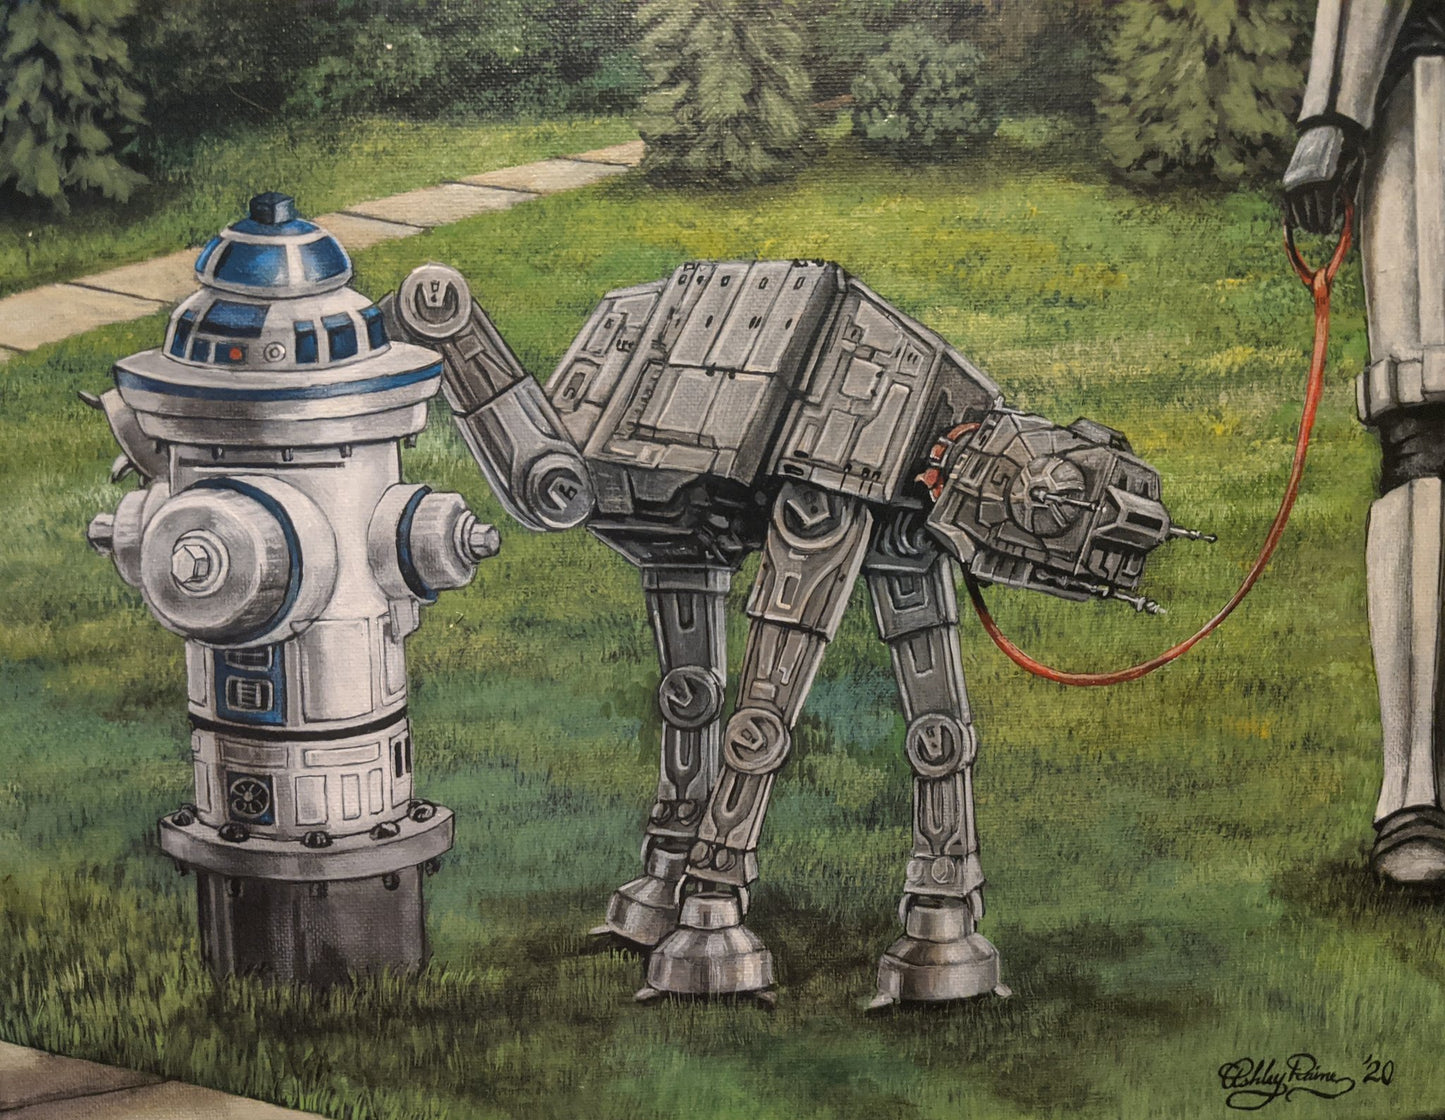 Load image into Gallery viewer, &amp;quot;Imperial Mark&amp;quot; Star Wars Parody Art Print by Ashley Raine   Who&amp;#39;s an Imperial Good Boy? Our favorite AT-AT pup is out for a walk with his Trooper. They&amp;#39;ve found the droid they&amp;#39;re looking for! Now, pup is making his mark on the R2-D2 fire hydrant!  Should he be doing that? We&amp;#39;re not too sure, but his Stormtrooper doesn&amp;#39;t seem to mind.
